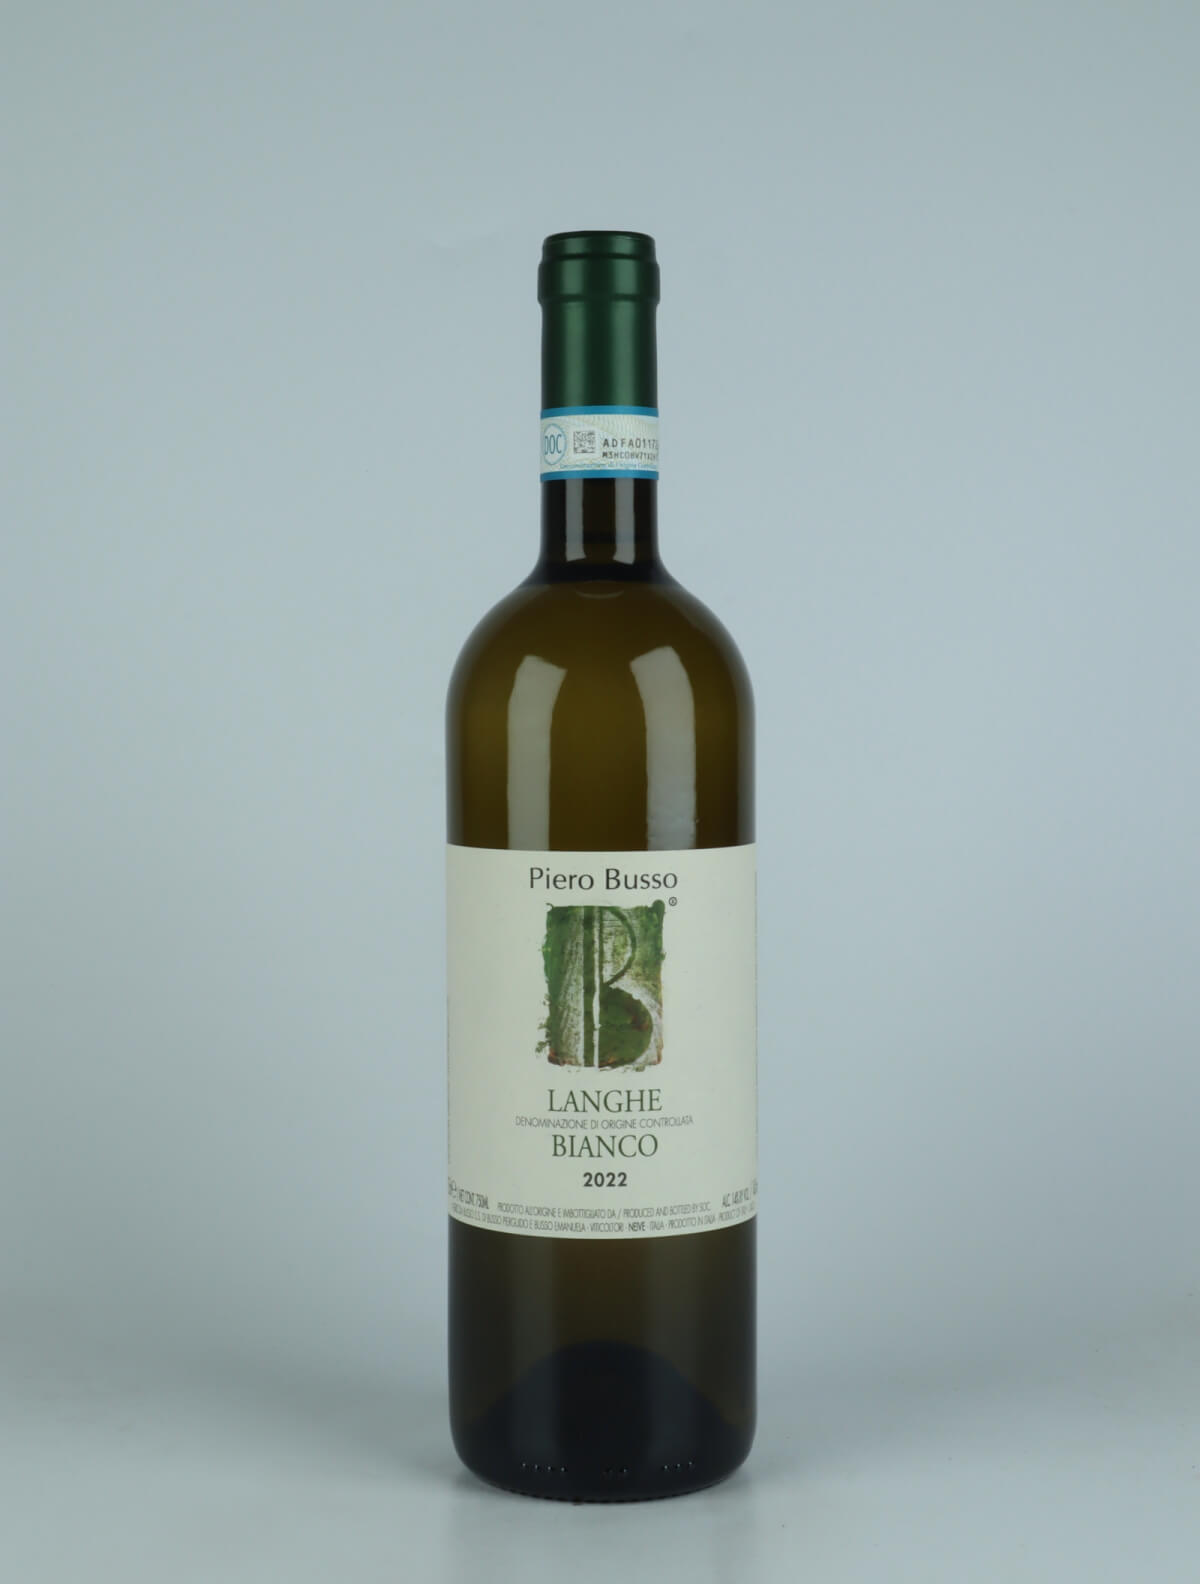 A bottle 2022 Langhe Bianco White wine from Piero Busso, Piedmont in Italy